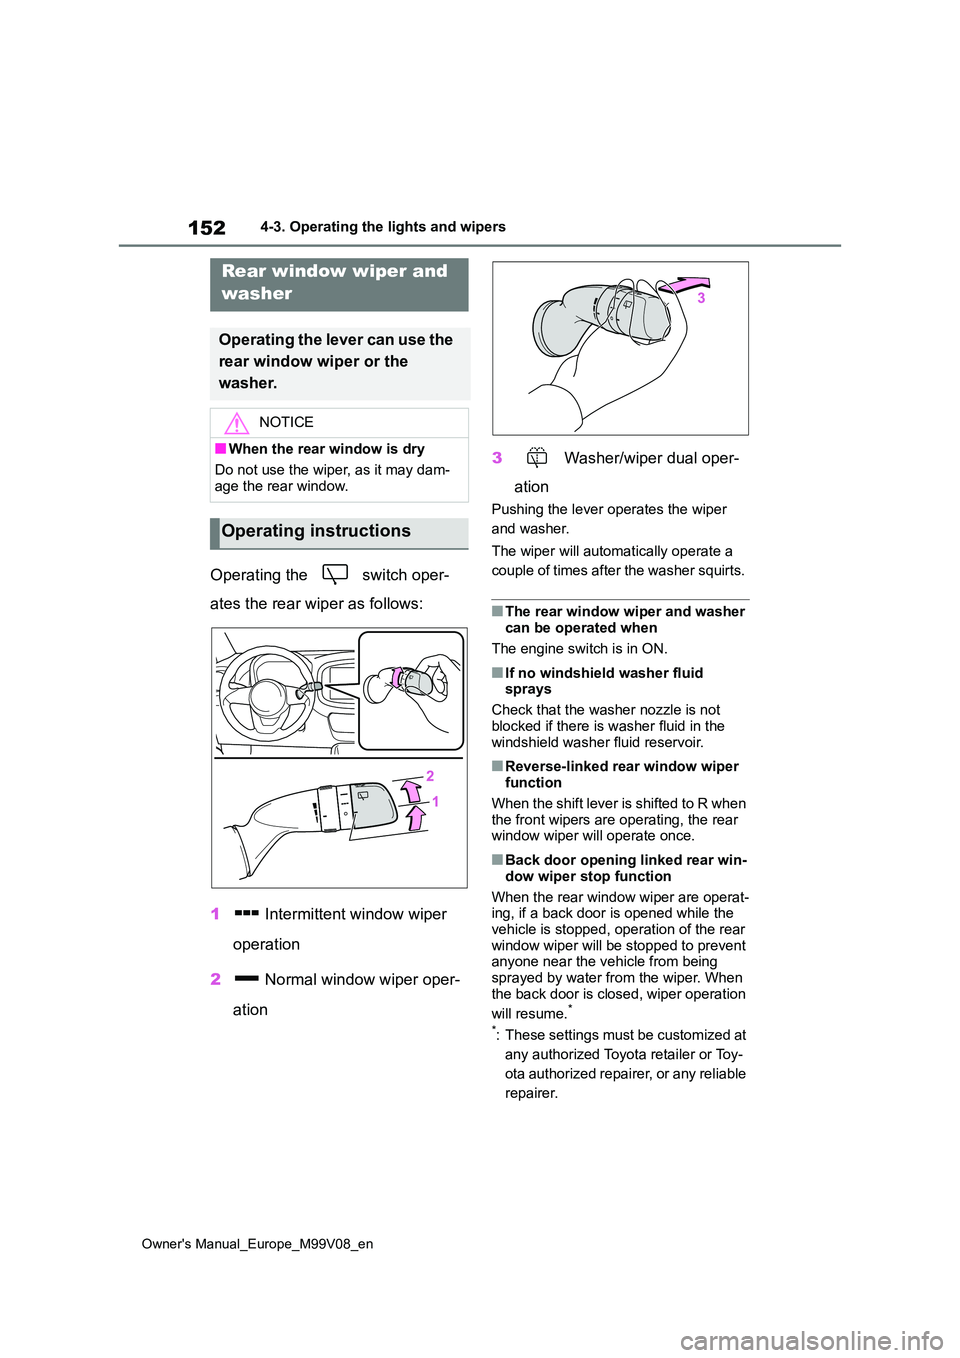 TOYOTA AYGO X 2022  Owners Manual (in English) 152
Owner's Manual_Europe_M99V08_en
4-3. Operating the lights and wipers
Operating the   switch oper- 
ates the rear wiper as follows: 
1  Intermittent window wiper  
operation 
2  Normal window w